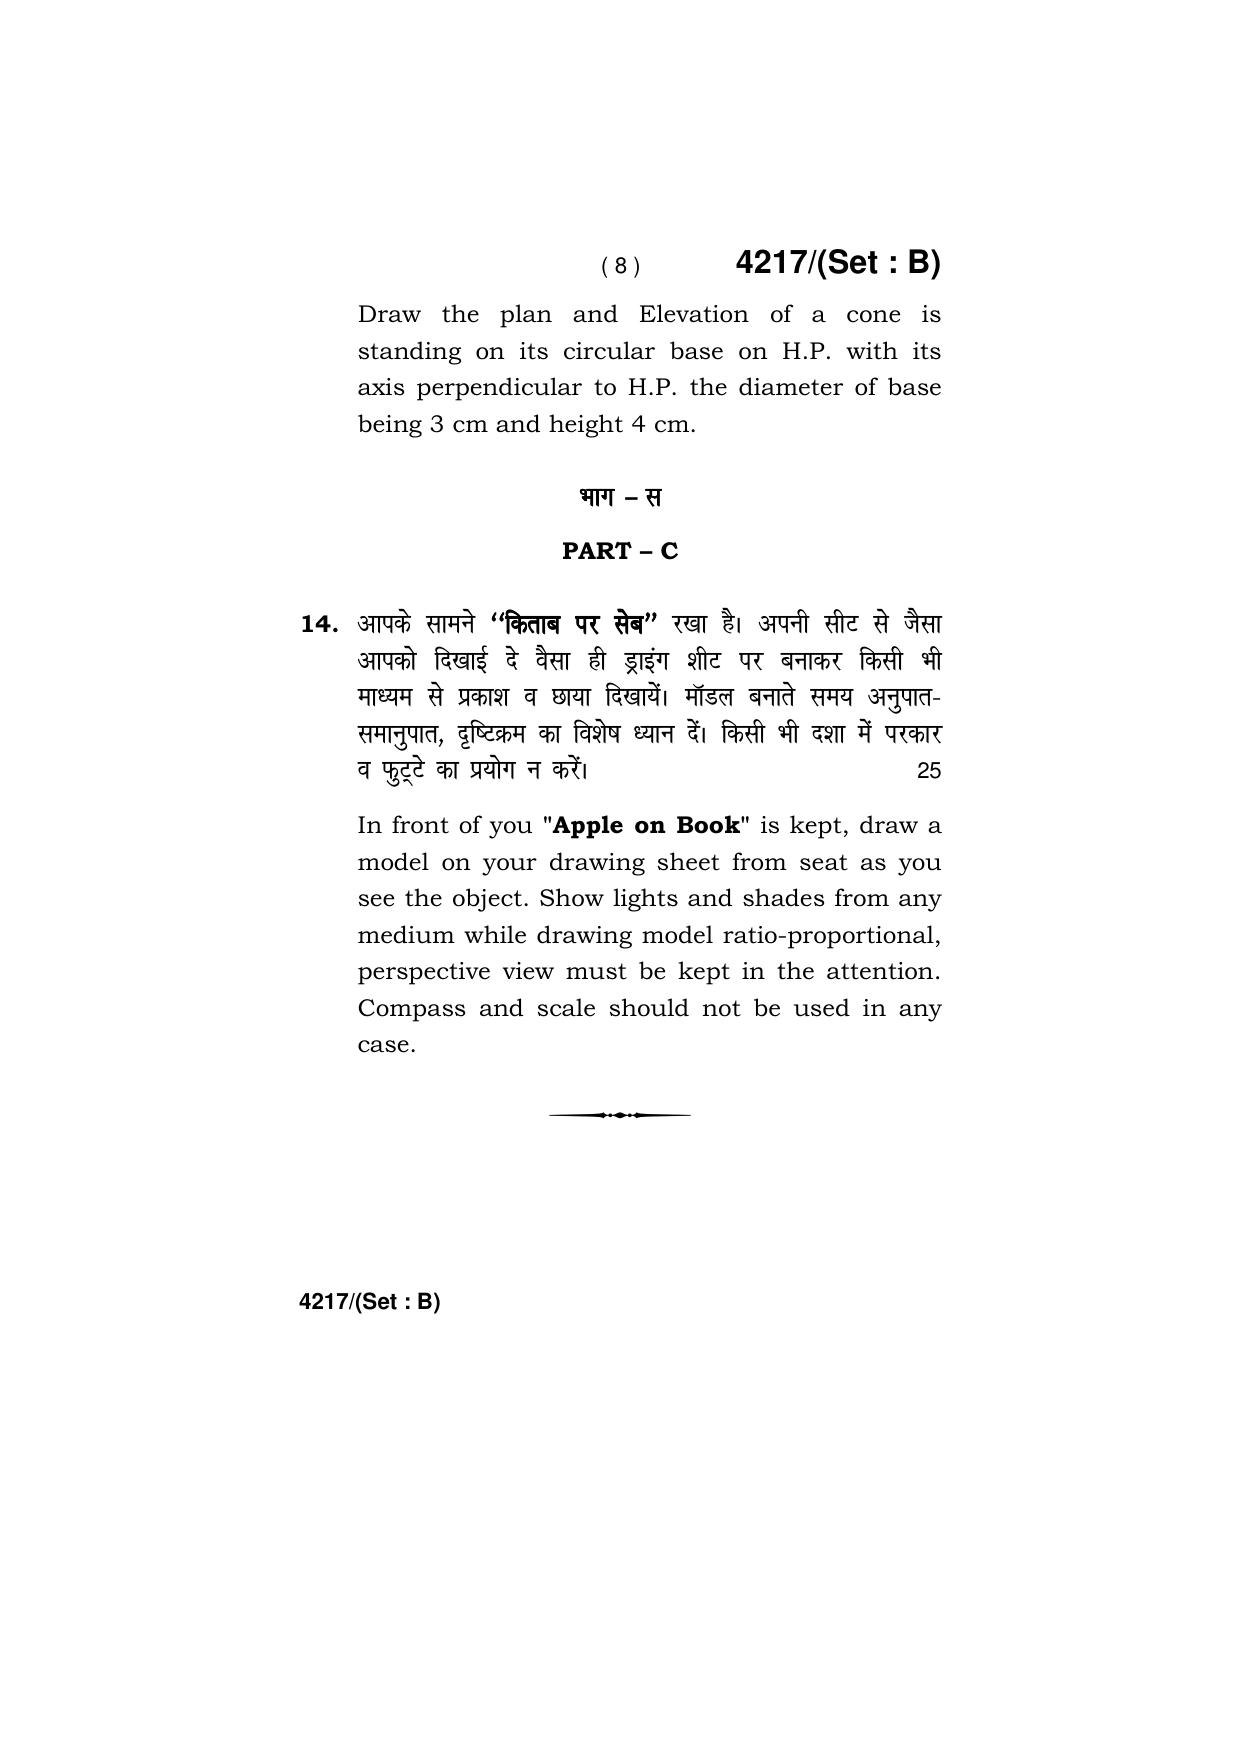 Haryana Board HBSE Class 10 Drawing (All Set) 2019 Question Paper - Page 16